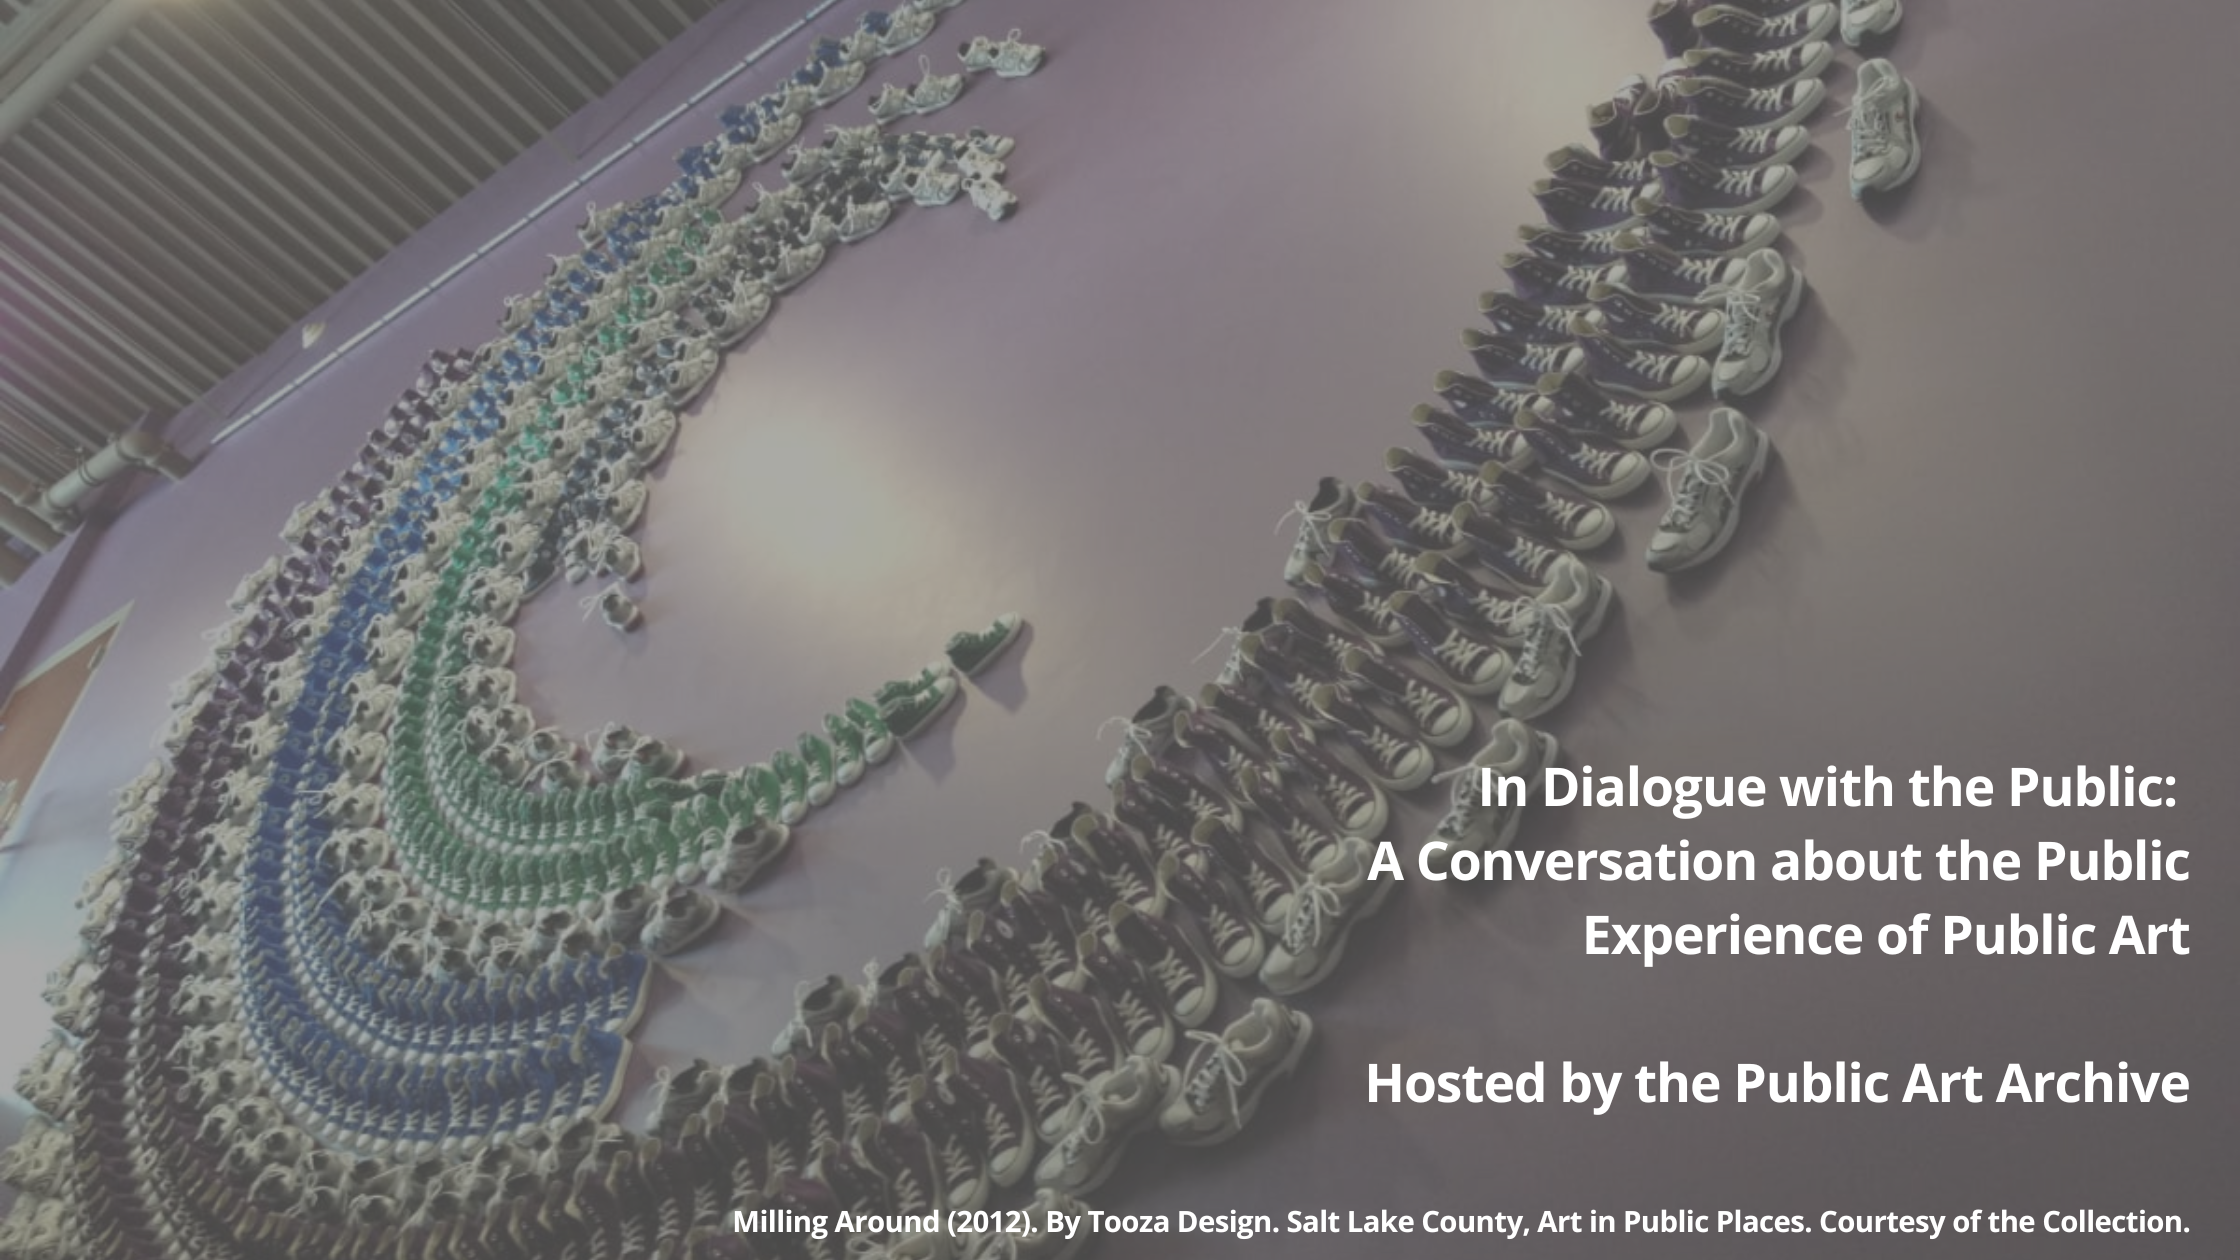 In Dialogue with the Public: A Conversation about the Public Experience of Public Art